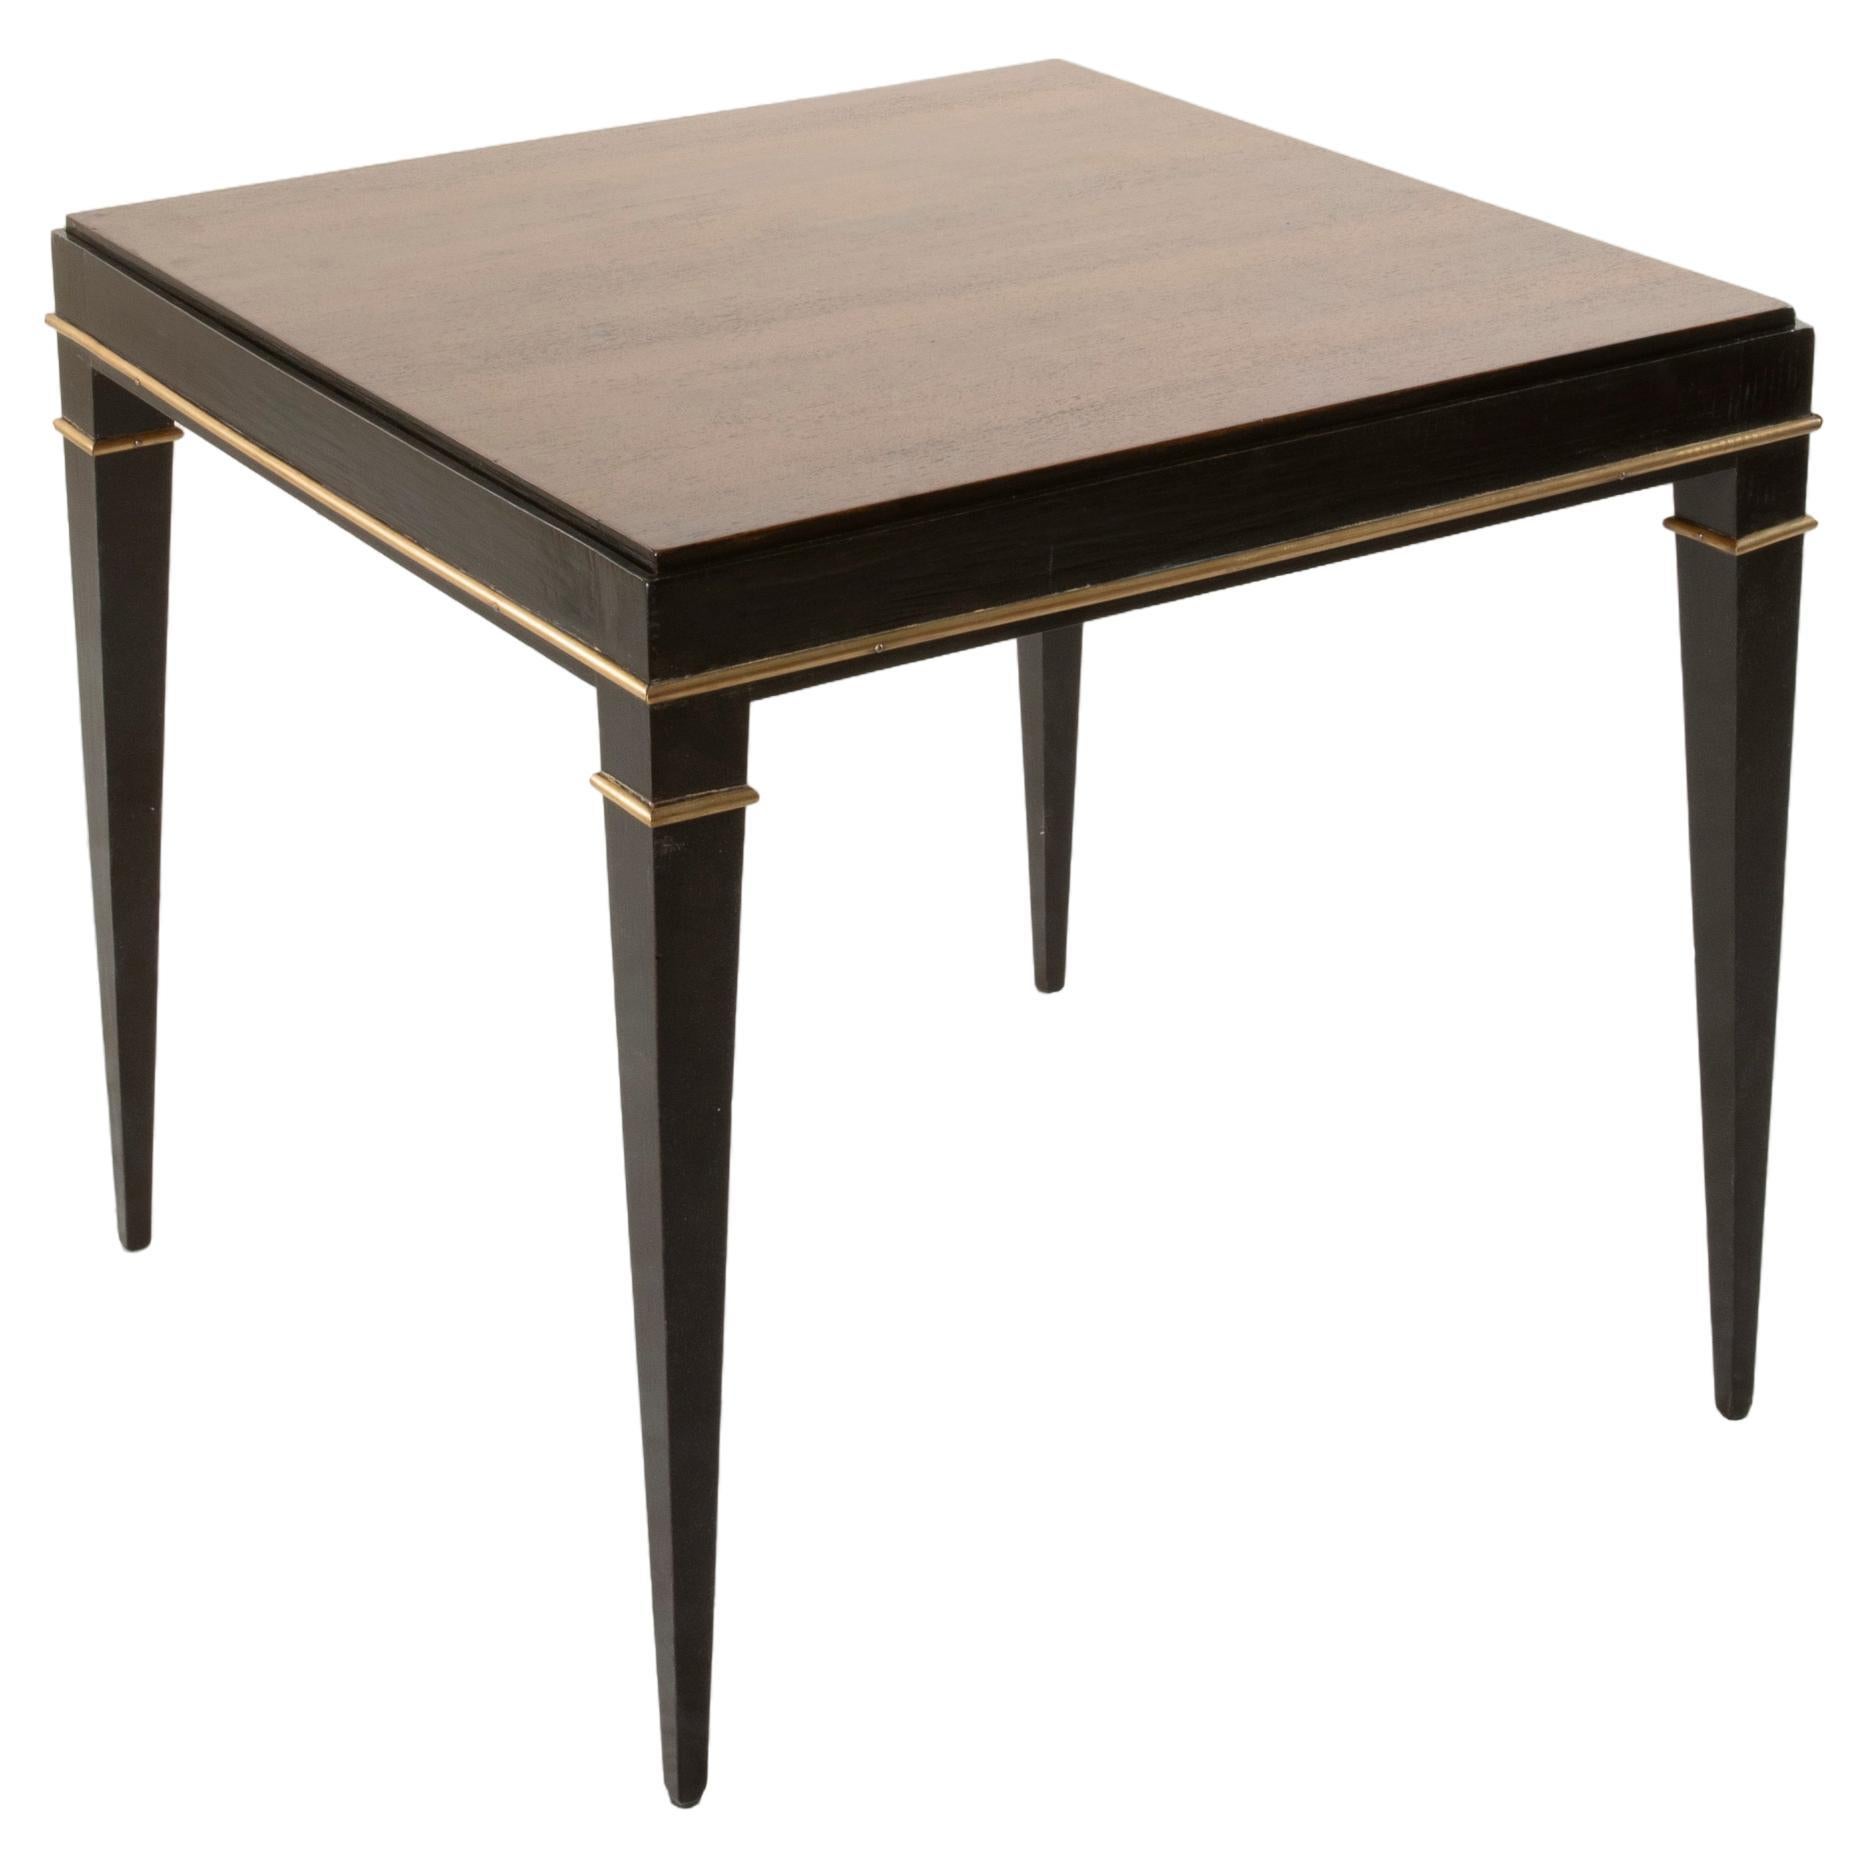 Mid-20th Century French Ebony and Palisander Game Table, Reversible Top  For Sale